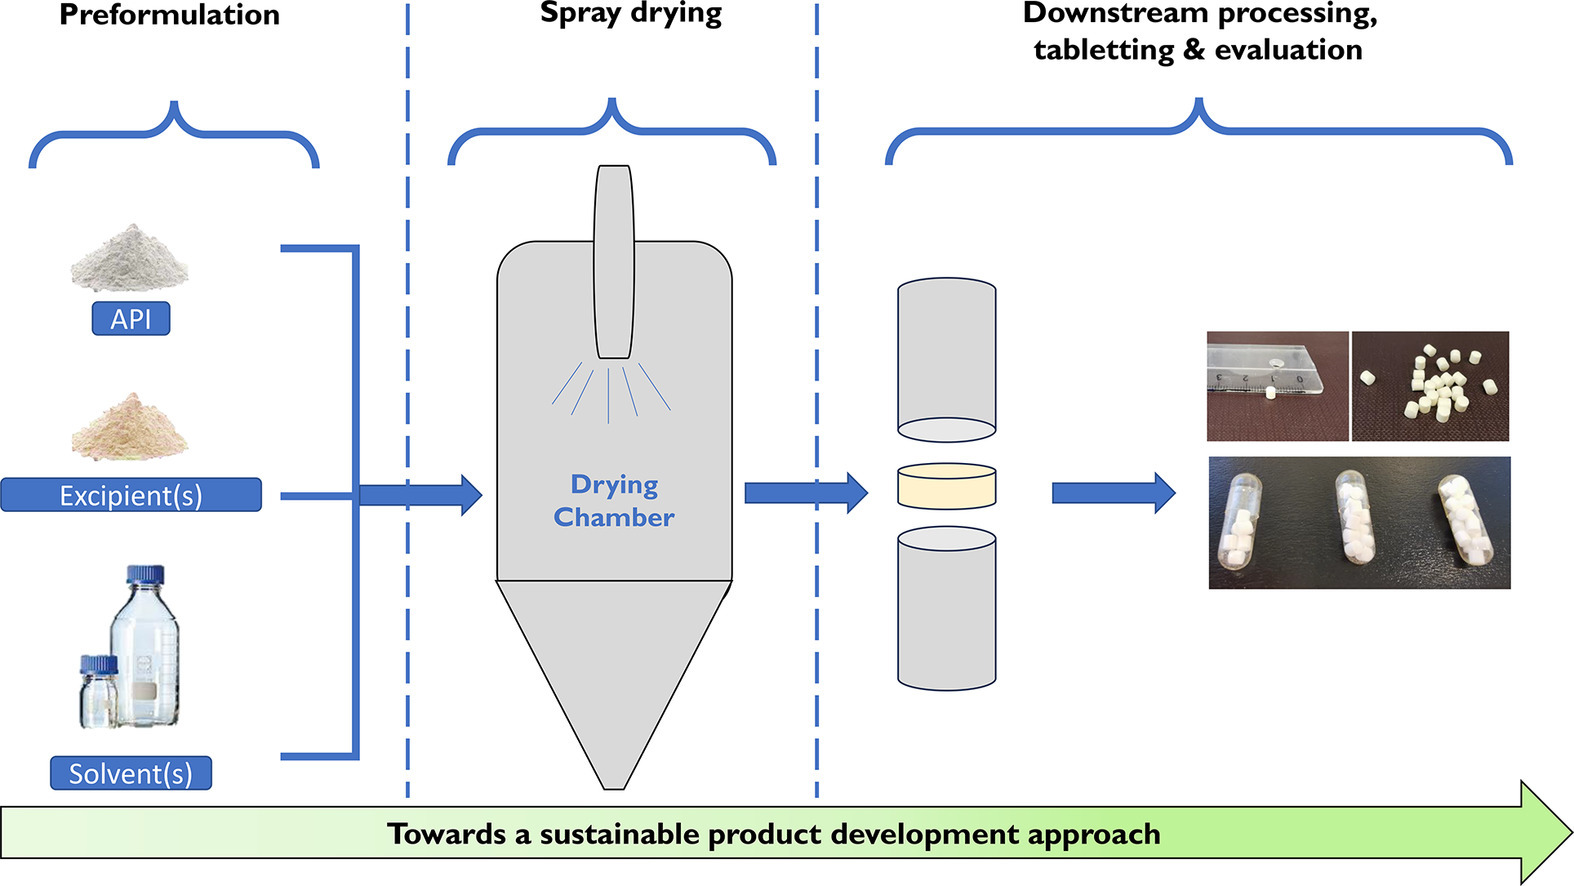 The challenge of downstream processing of spray dried amorphous solid dispersions into minitablets designed for the paediatric population